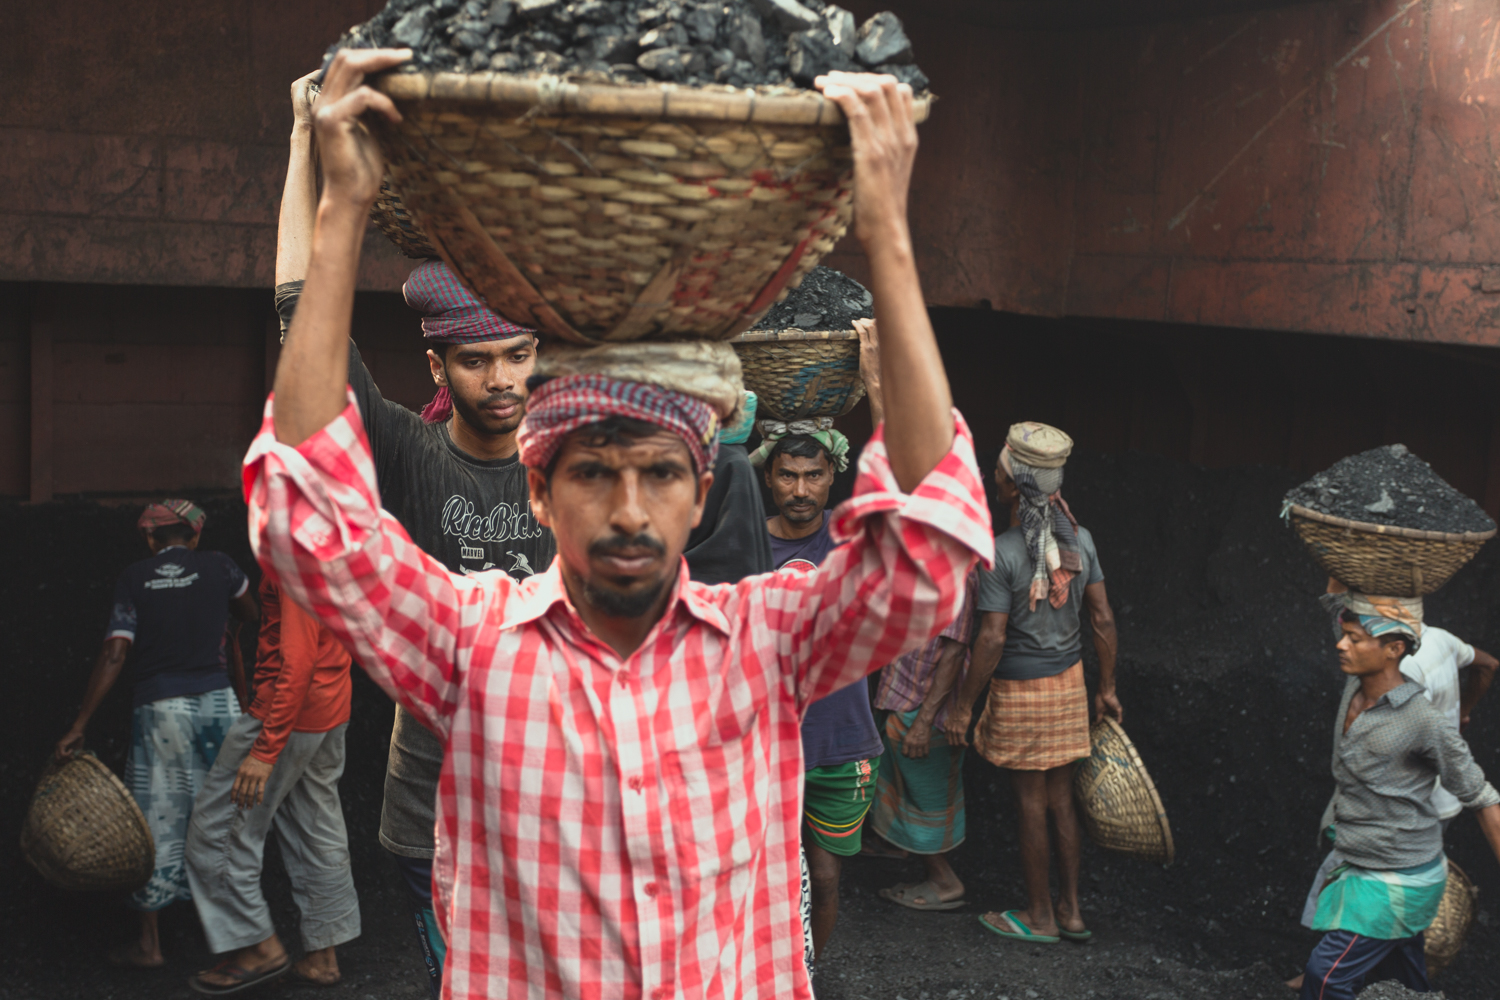 Heavy baskets of coal are transported on the workers' heads in hot conditions at Dhaka, Bangladesh.